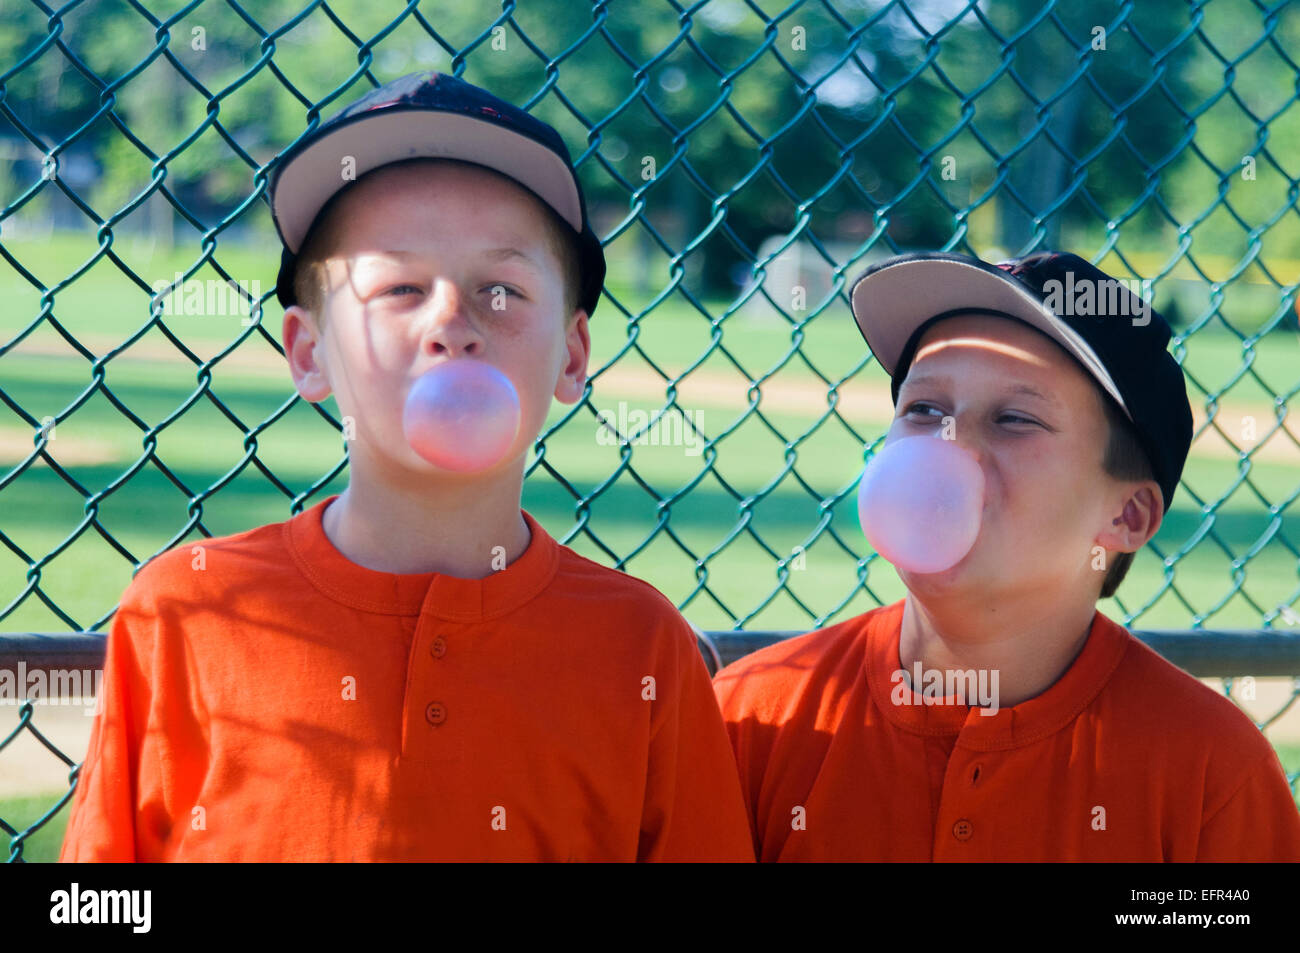 Two young male baseball players blowing bubbles with bubblegum Stock Photo